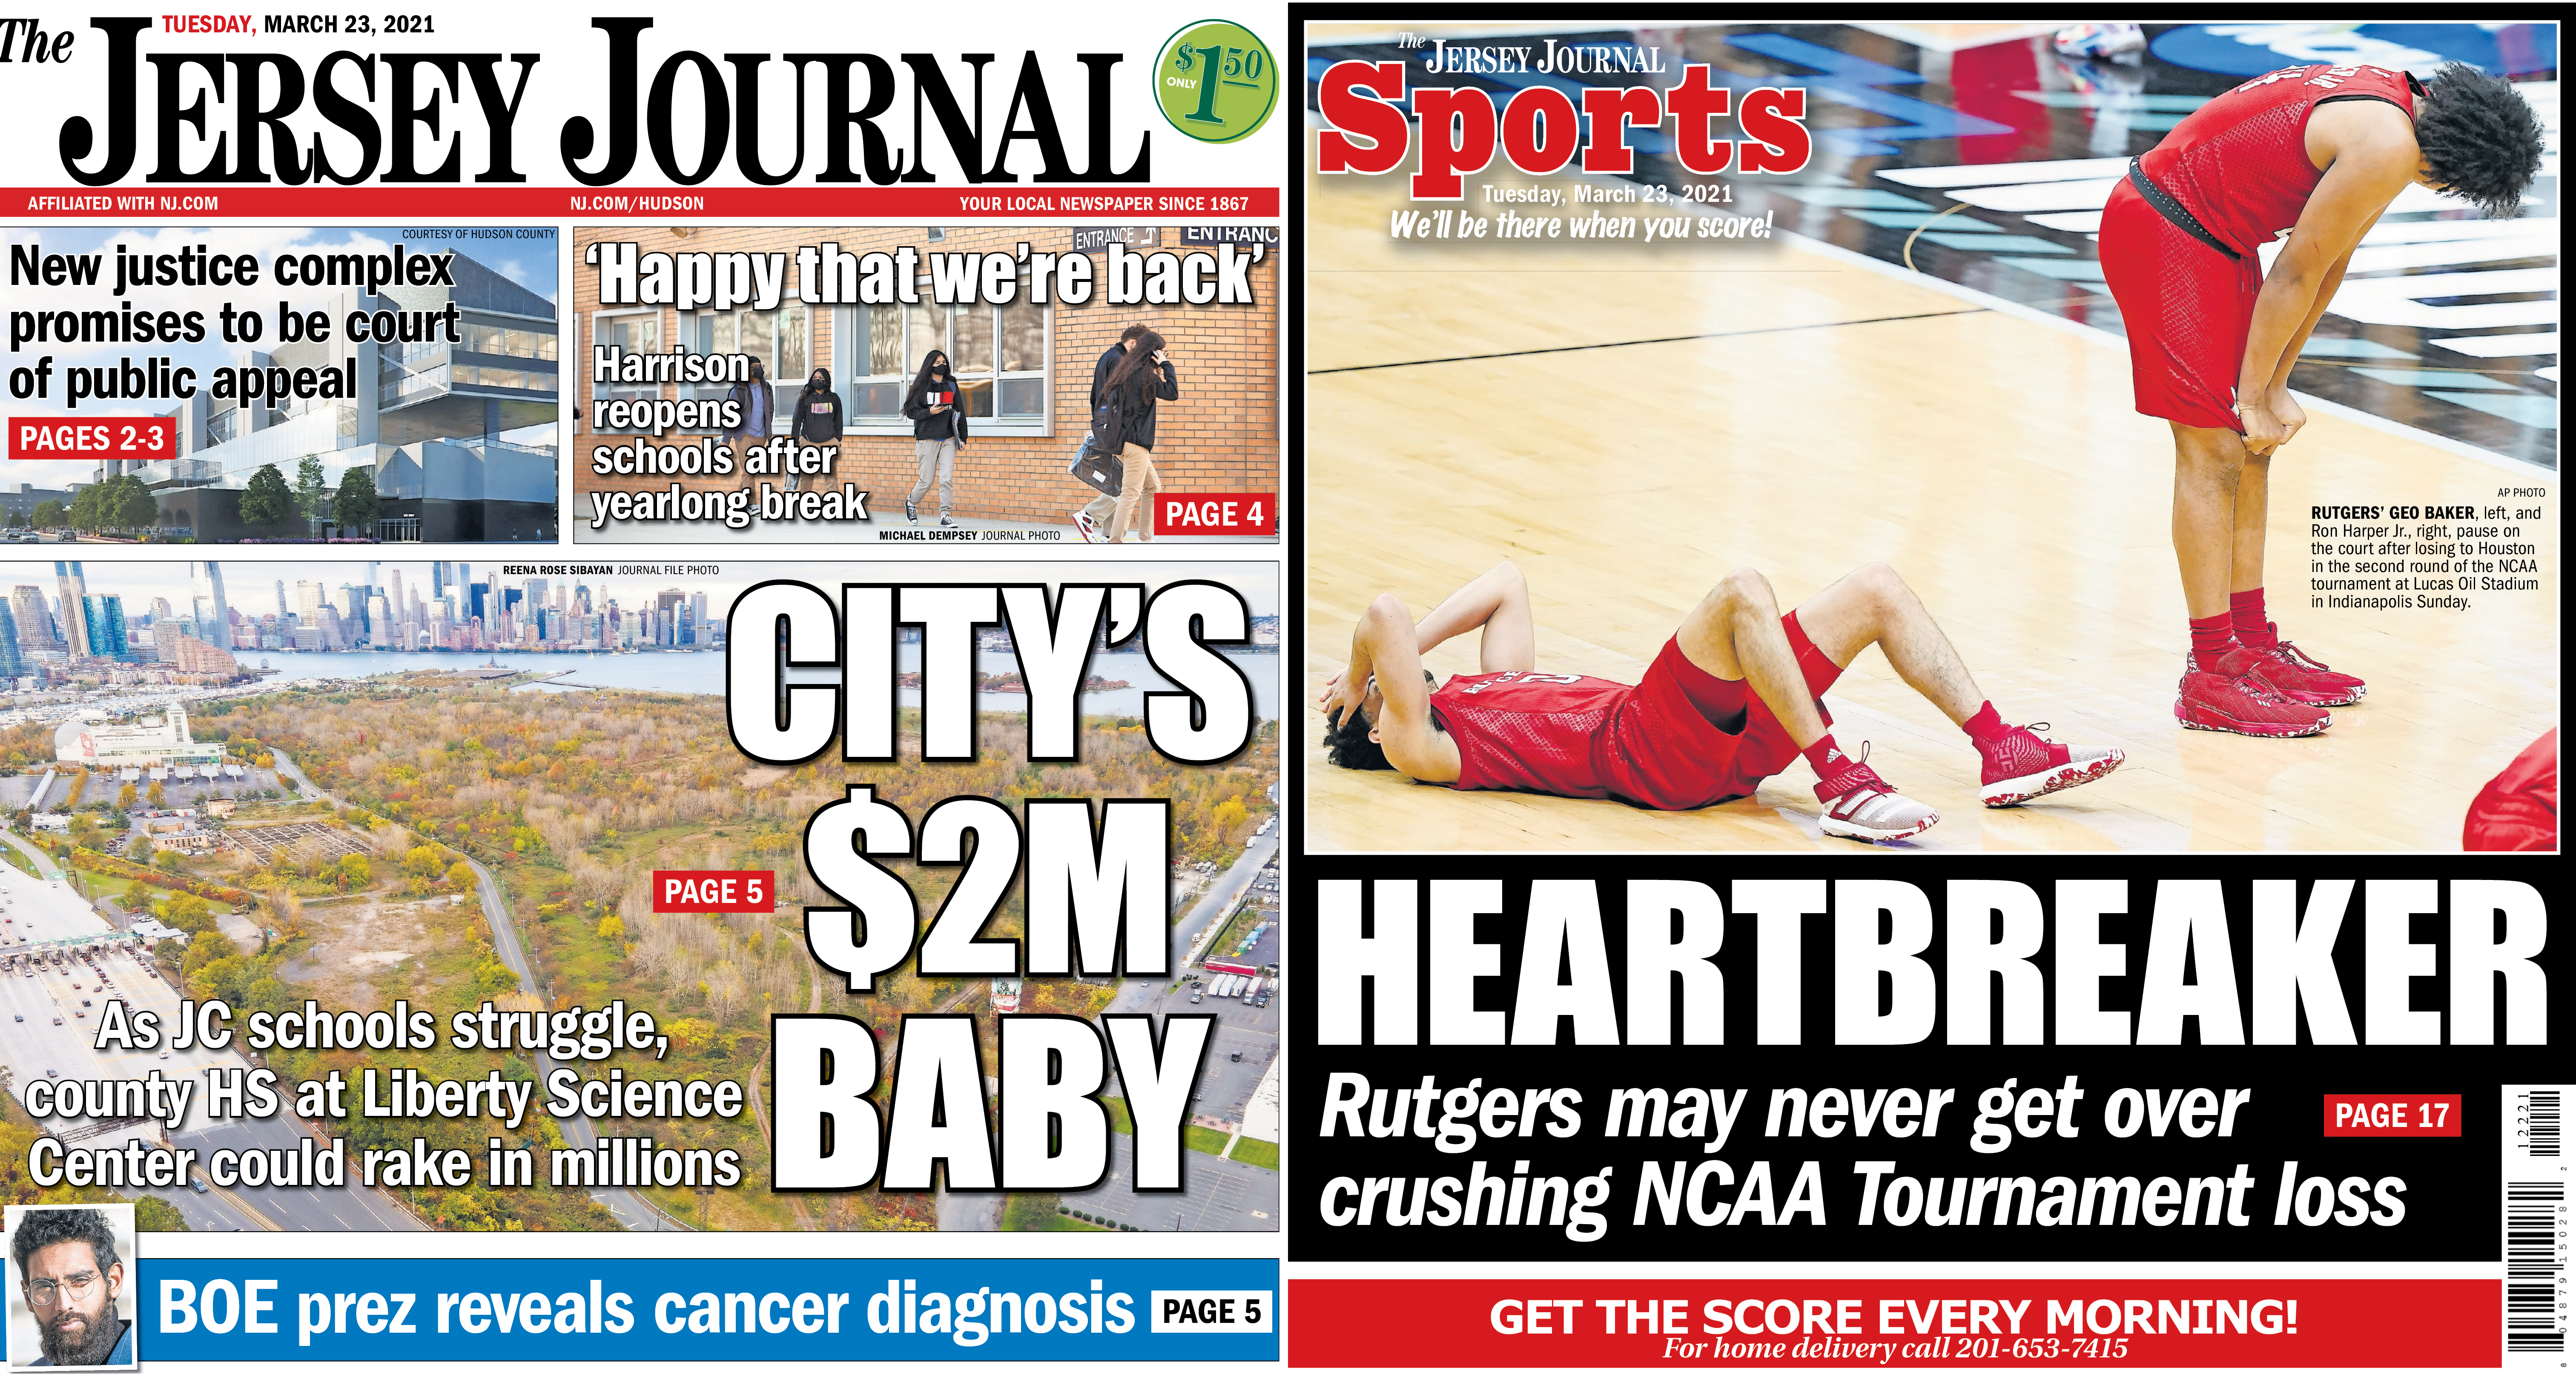 Jersey Journal front and back page news: Tuesday, March 23, 2021 